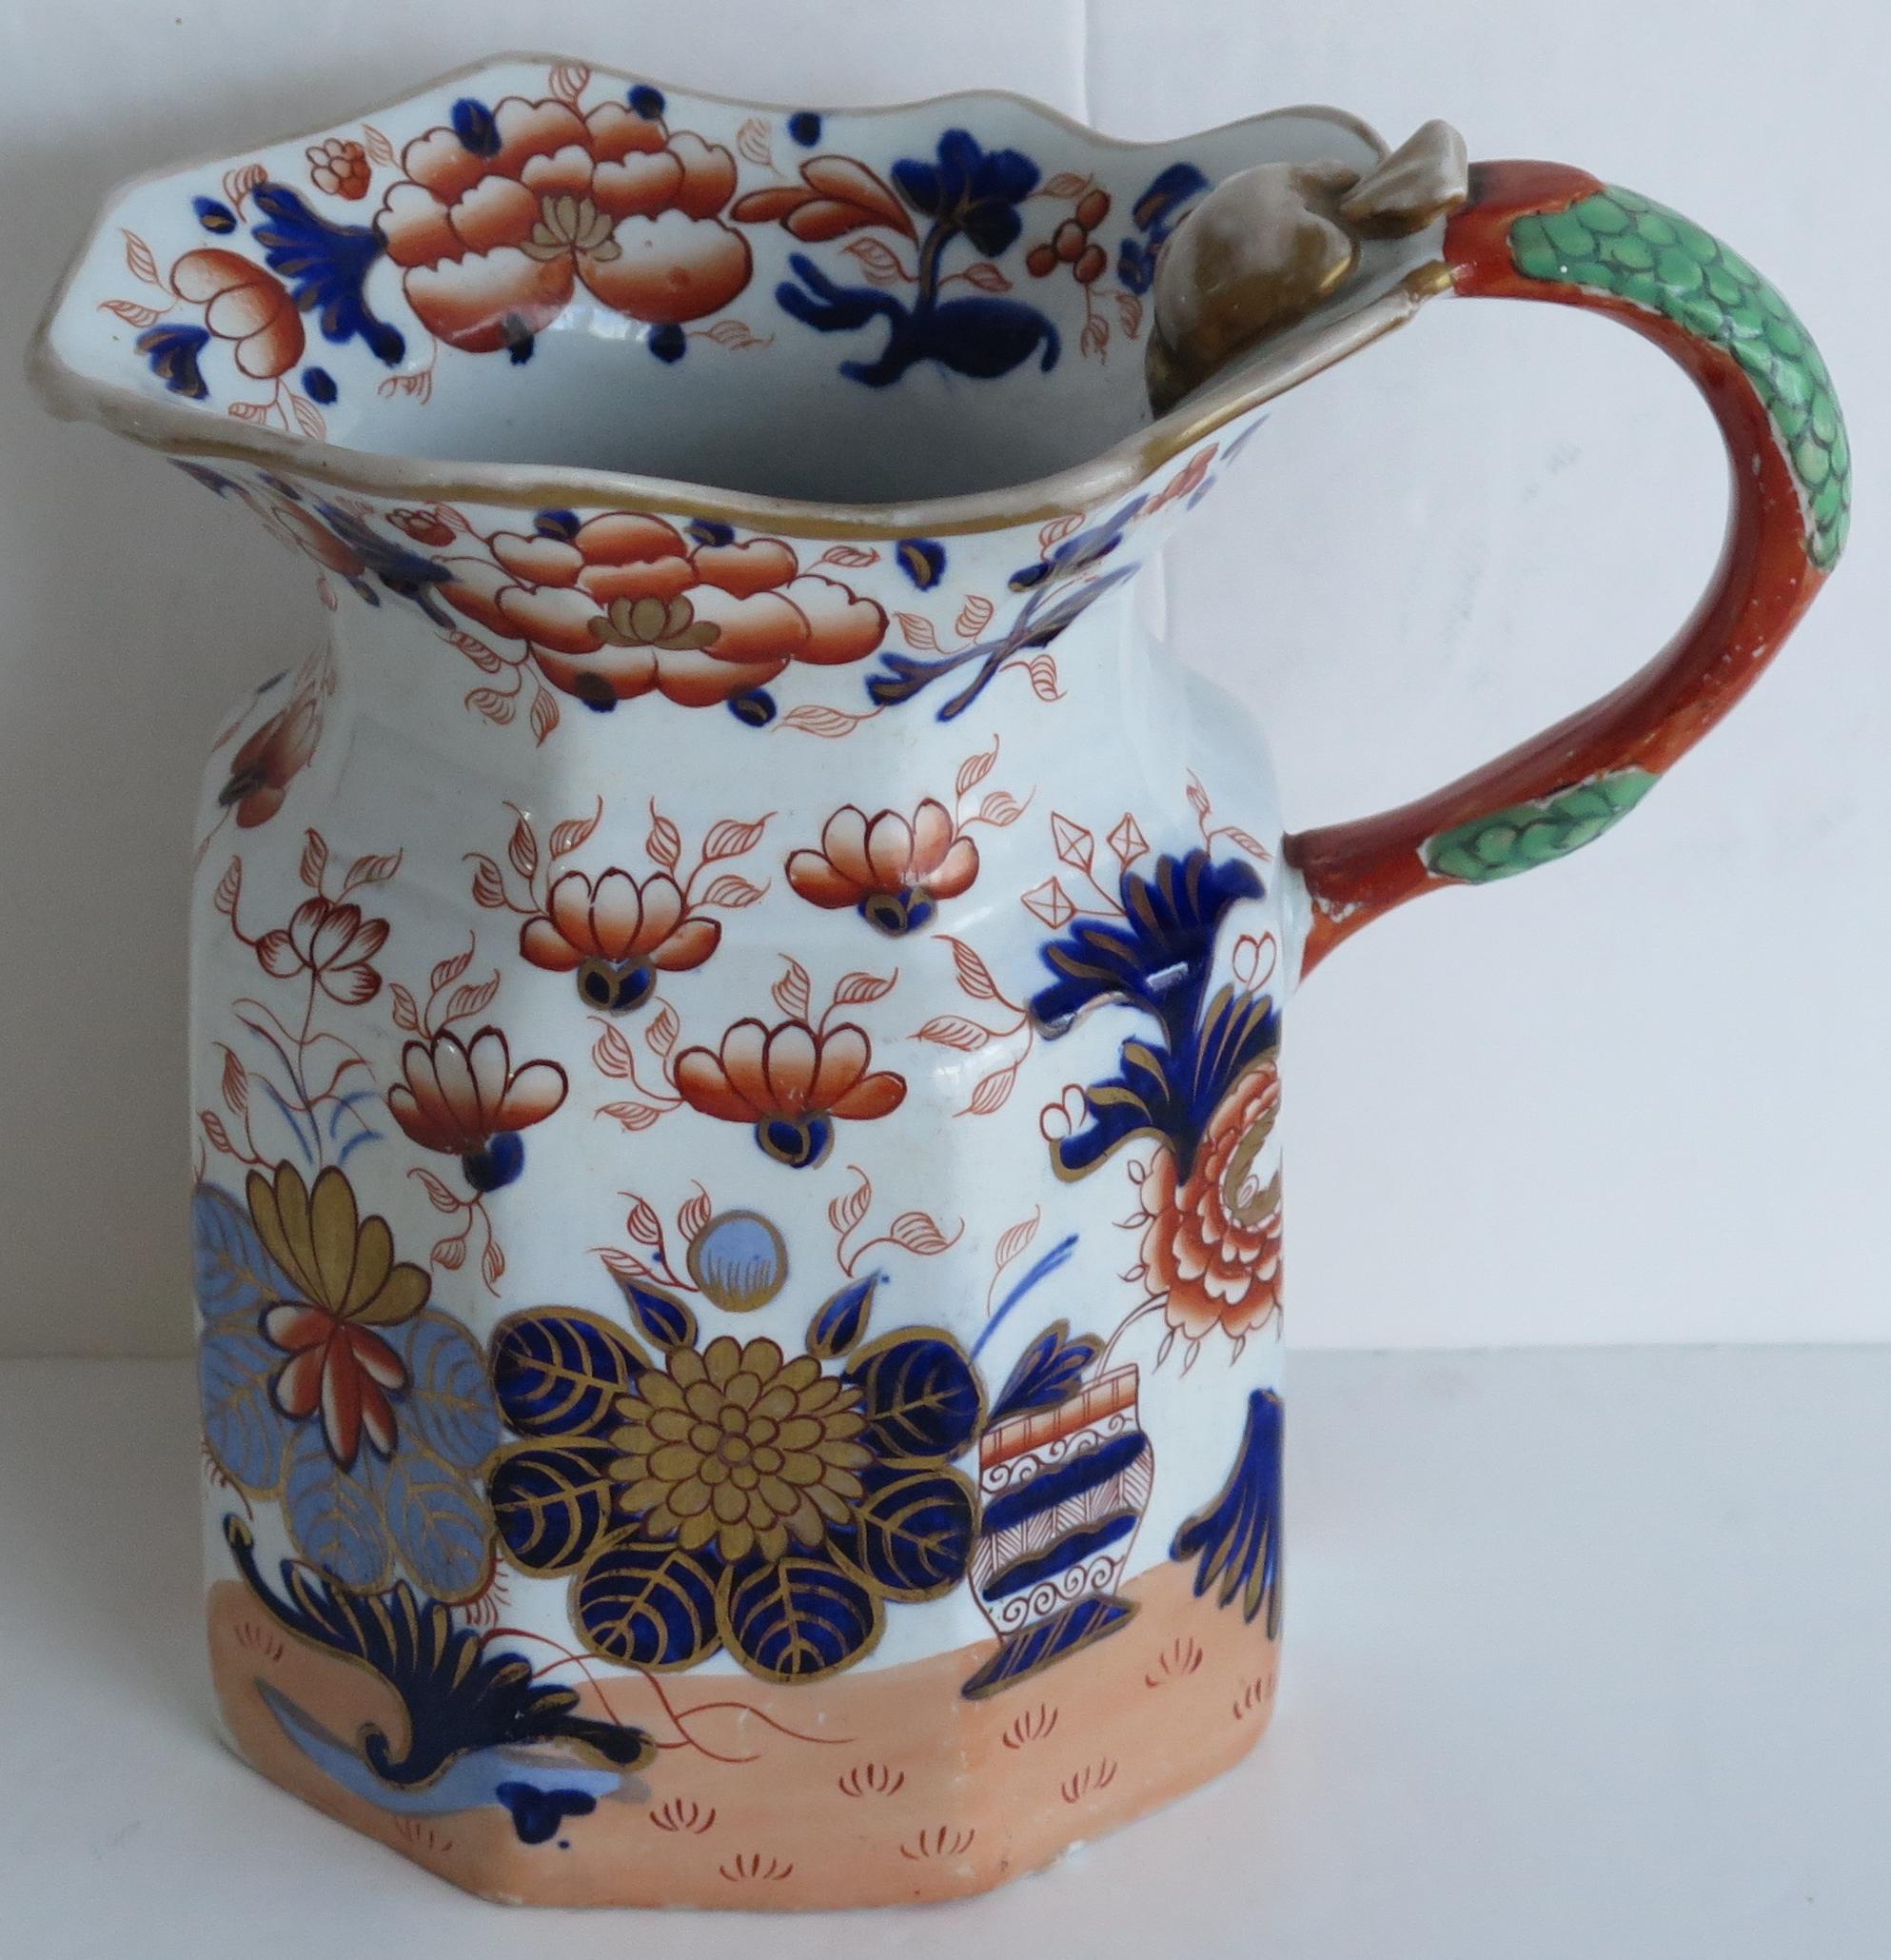 This is a very good Mason's ironstone jug or pitcher hand painted in the very decorative basket Japan gilded pattern, produced by the Mason's factory at Lane Delph, Staffordshire, England, circa 1835.

The jug has the Fenton shape with a dragon